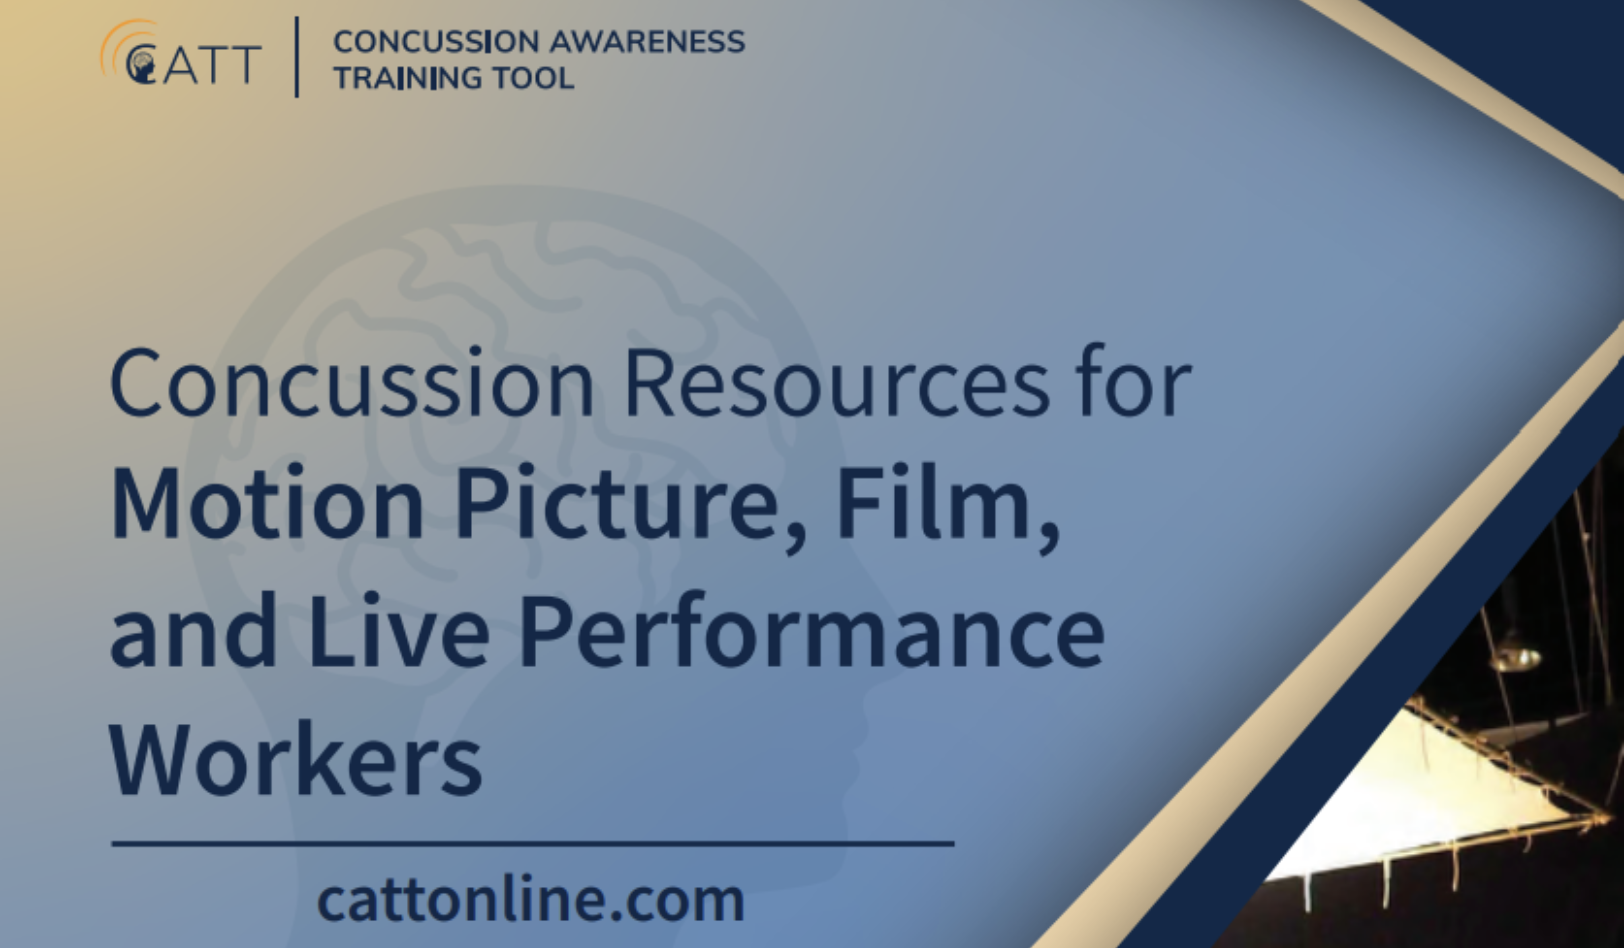 Concussion Resources for Motion Picture, Film and Live Performance Workers